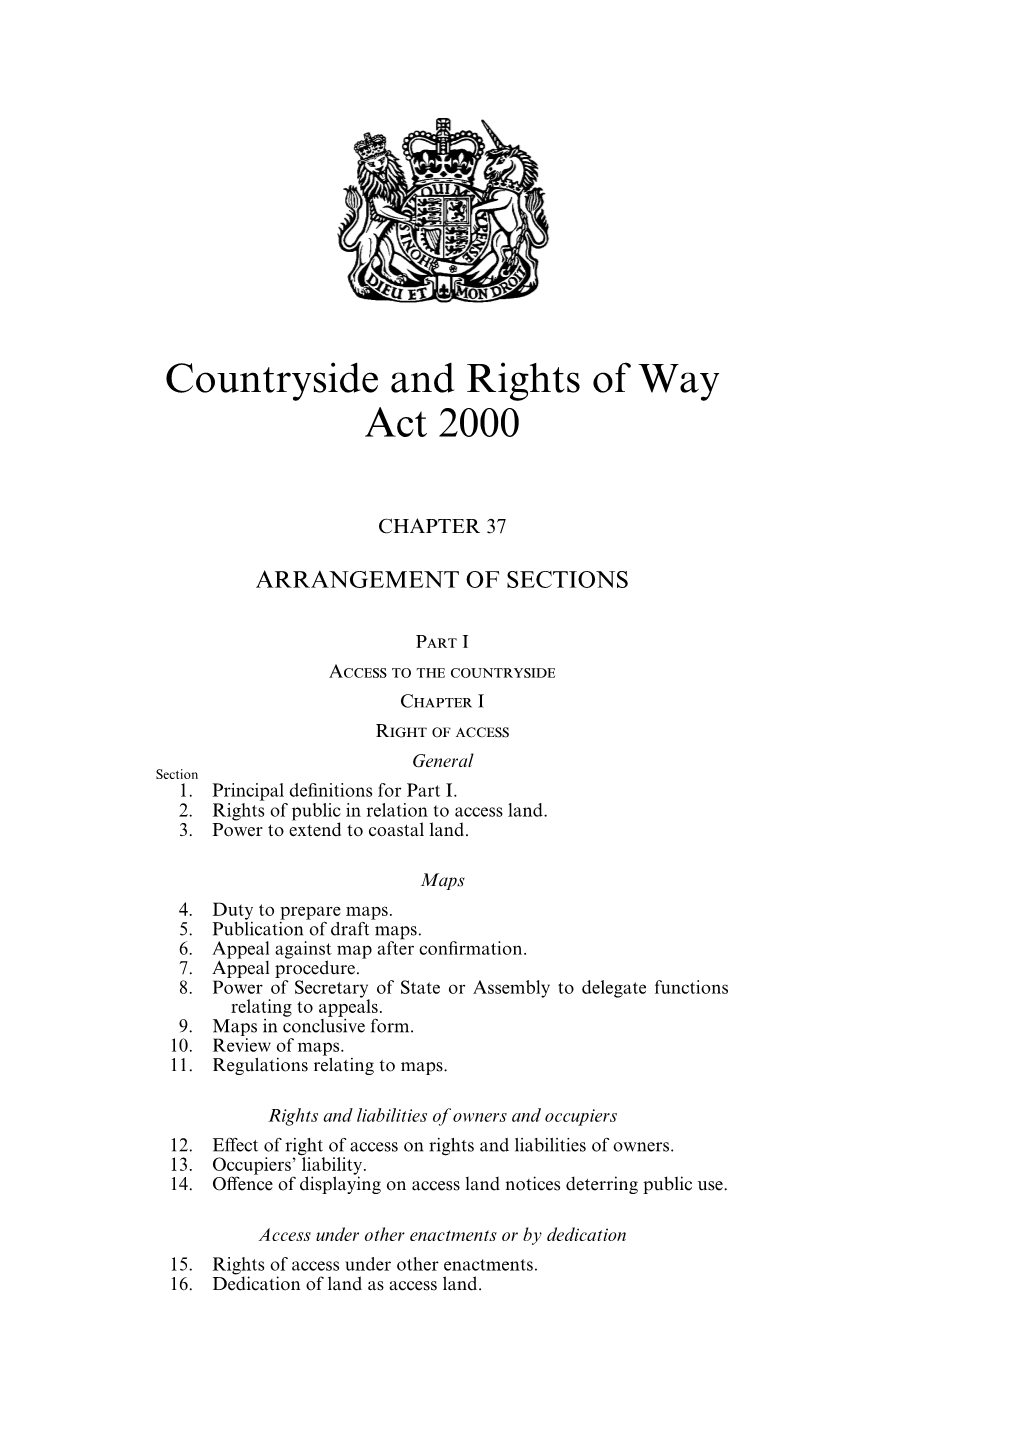 Countryside and Rights of Way Act 2000